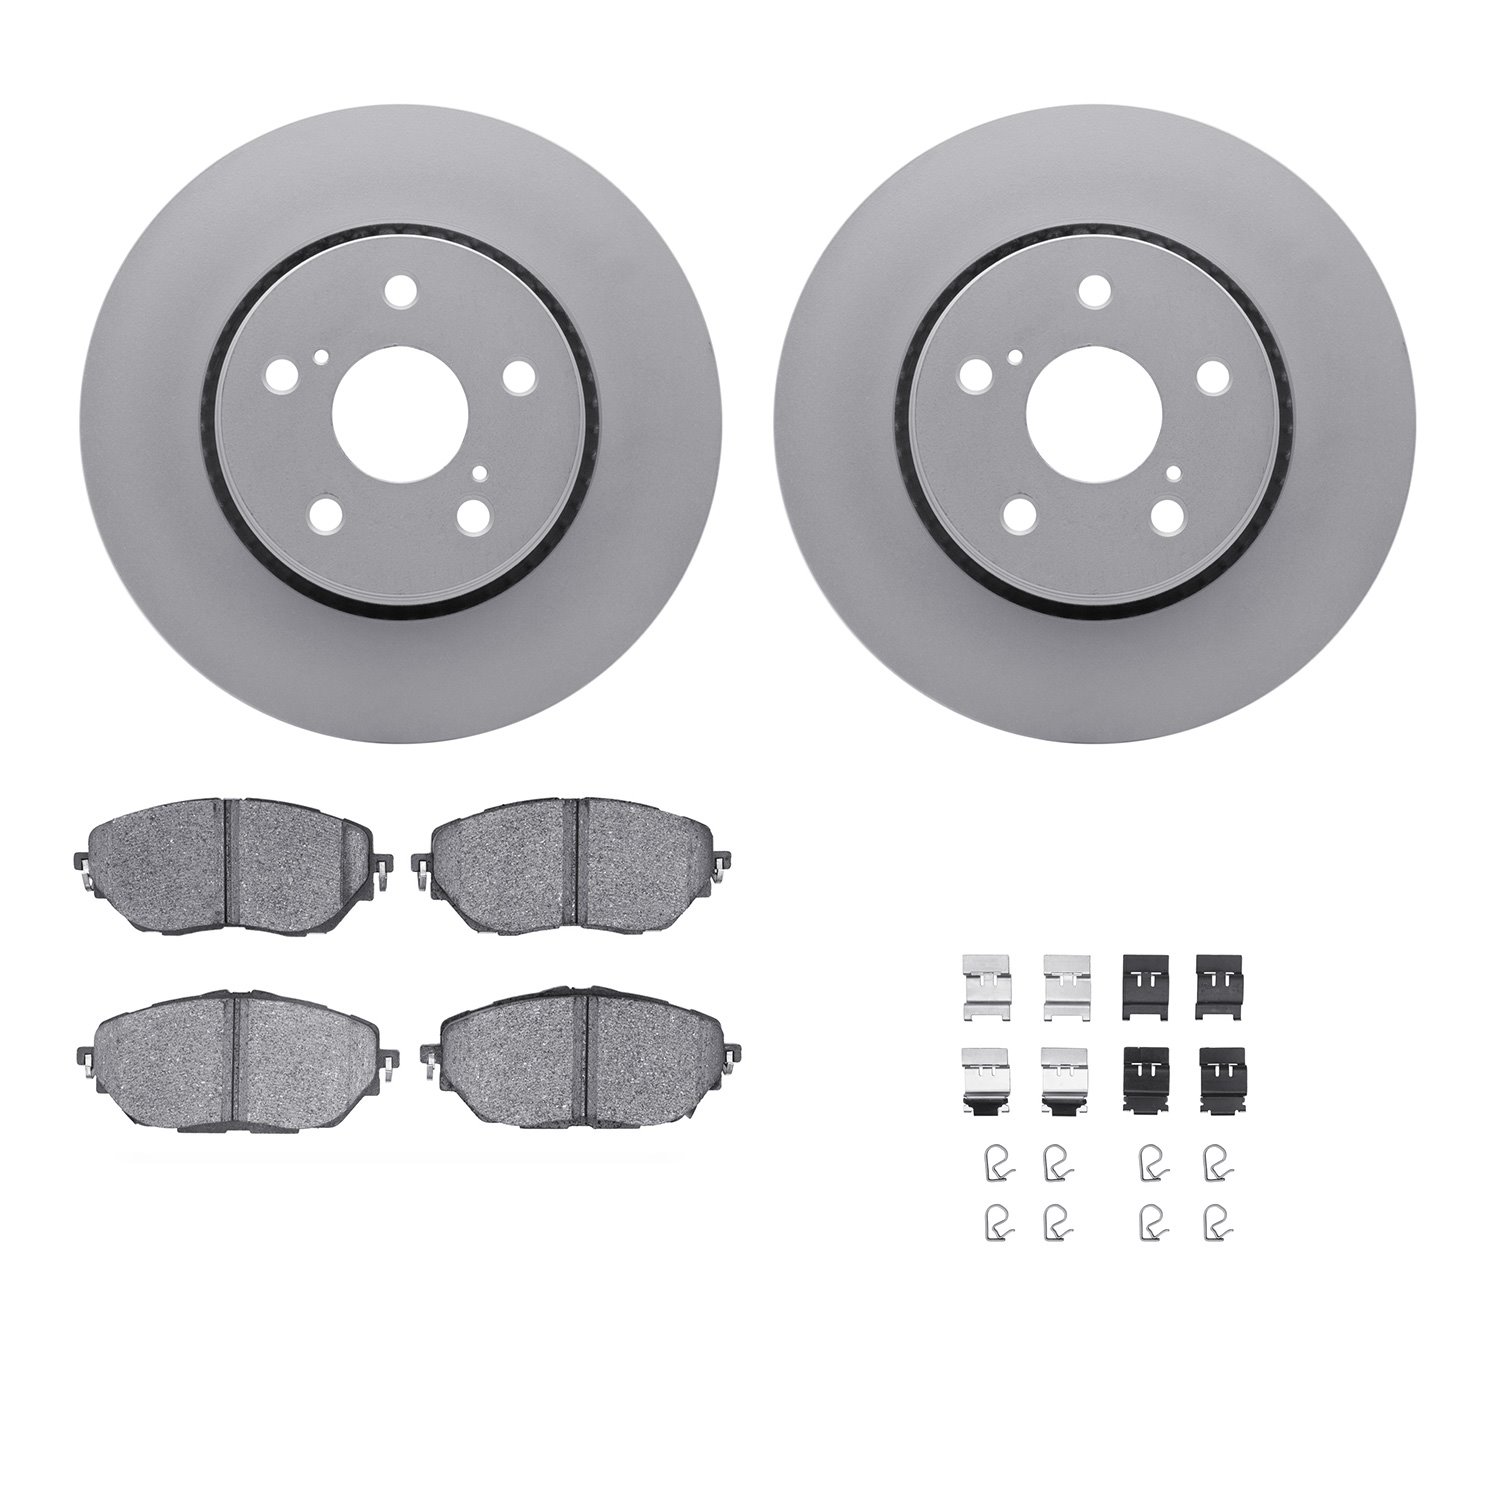 4312-76093 Geospec Brake Rotors with 3000-Series Ceramic Brake Pads & Hardware, Fits Select Lexus/Toyota/Scion, Position: Front